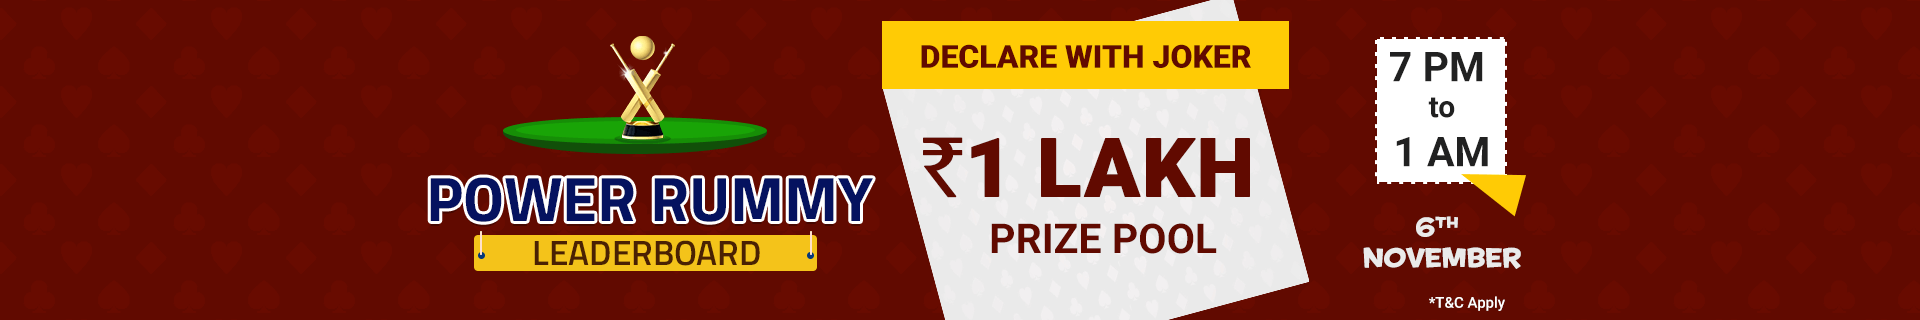 Rummy Leaderboard Contest